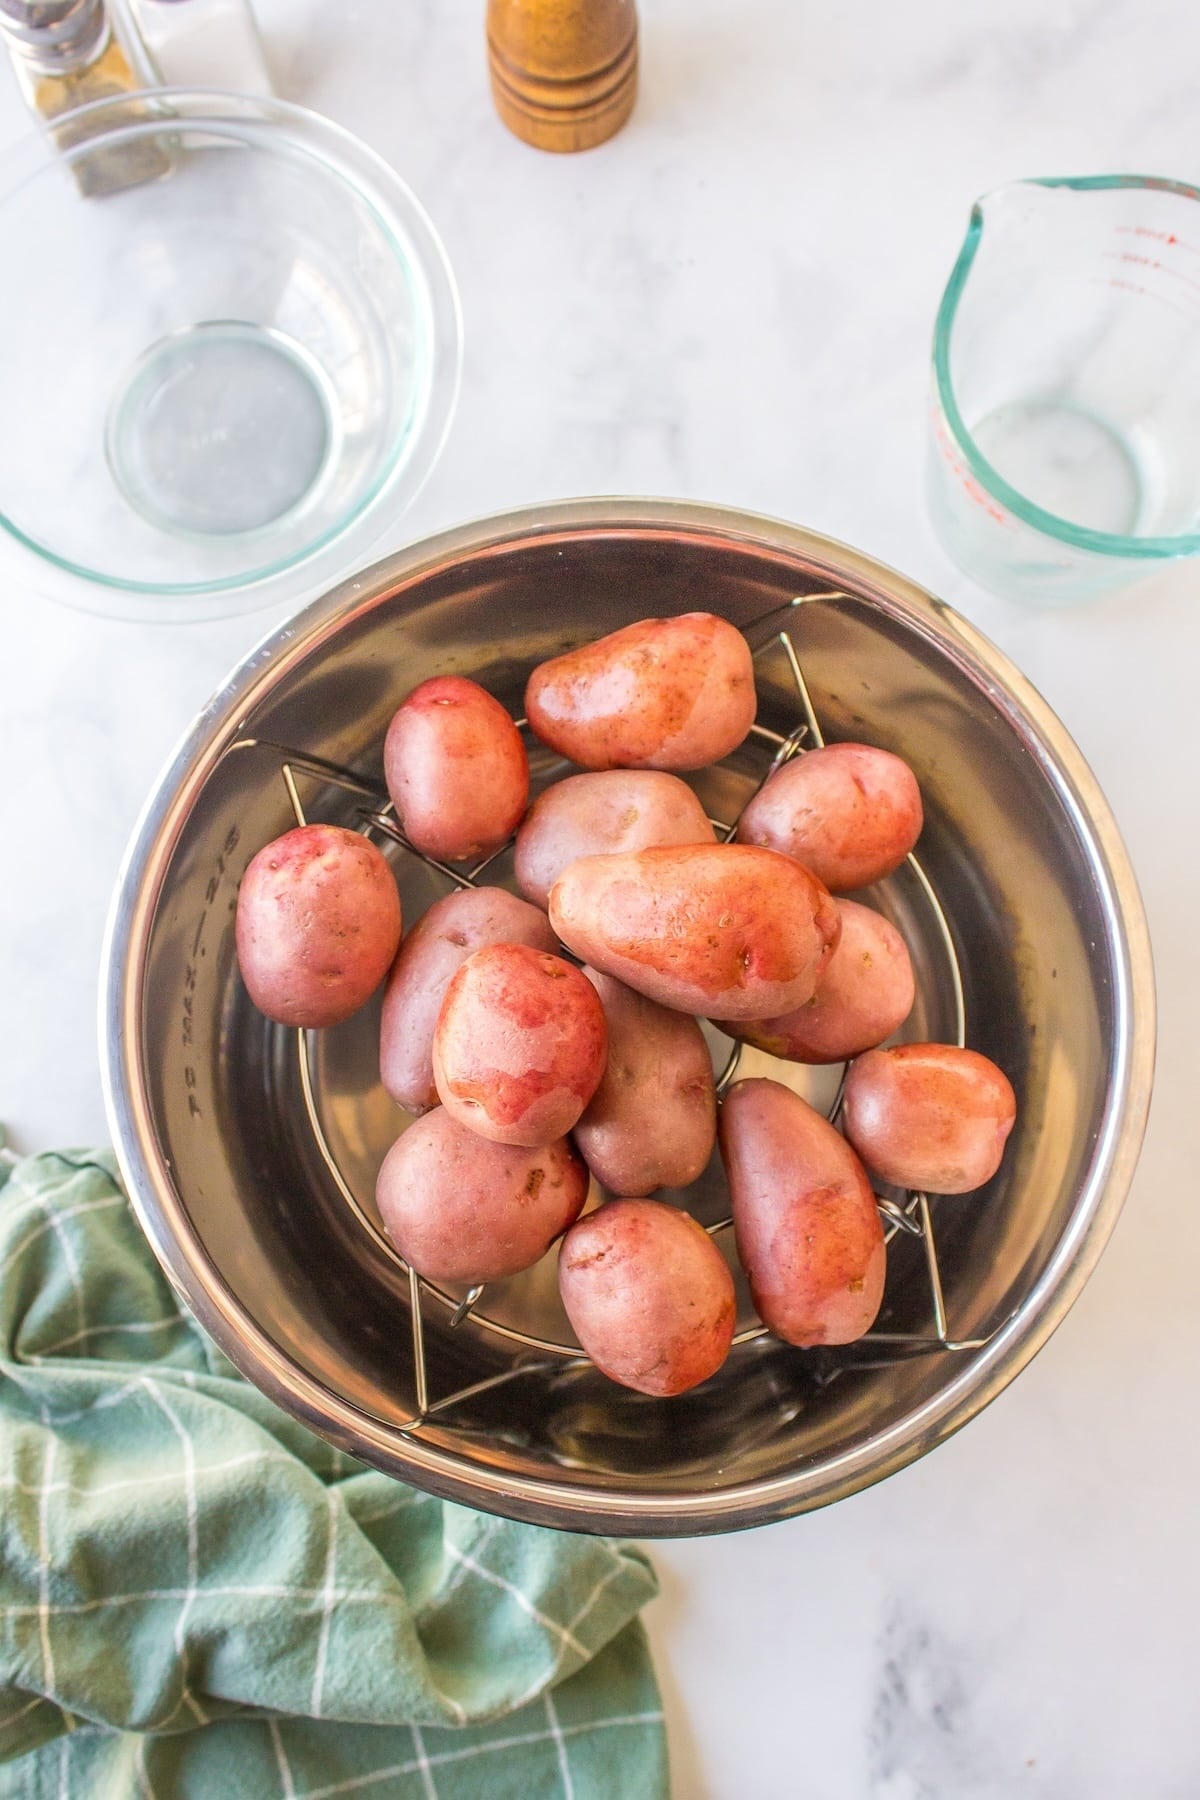 red potatoes ready to be boiled inside instant pot pressure cooker.